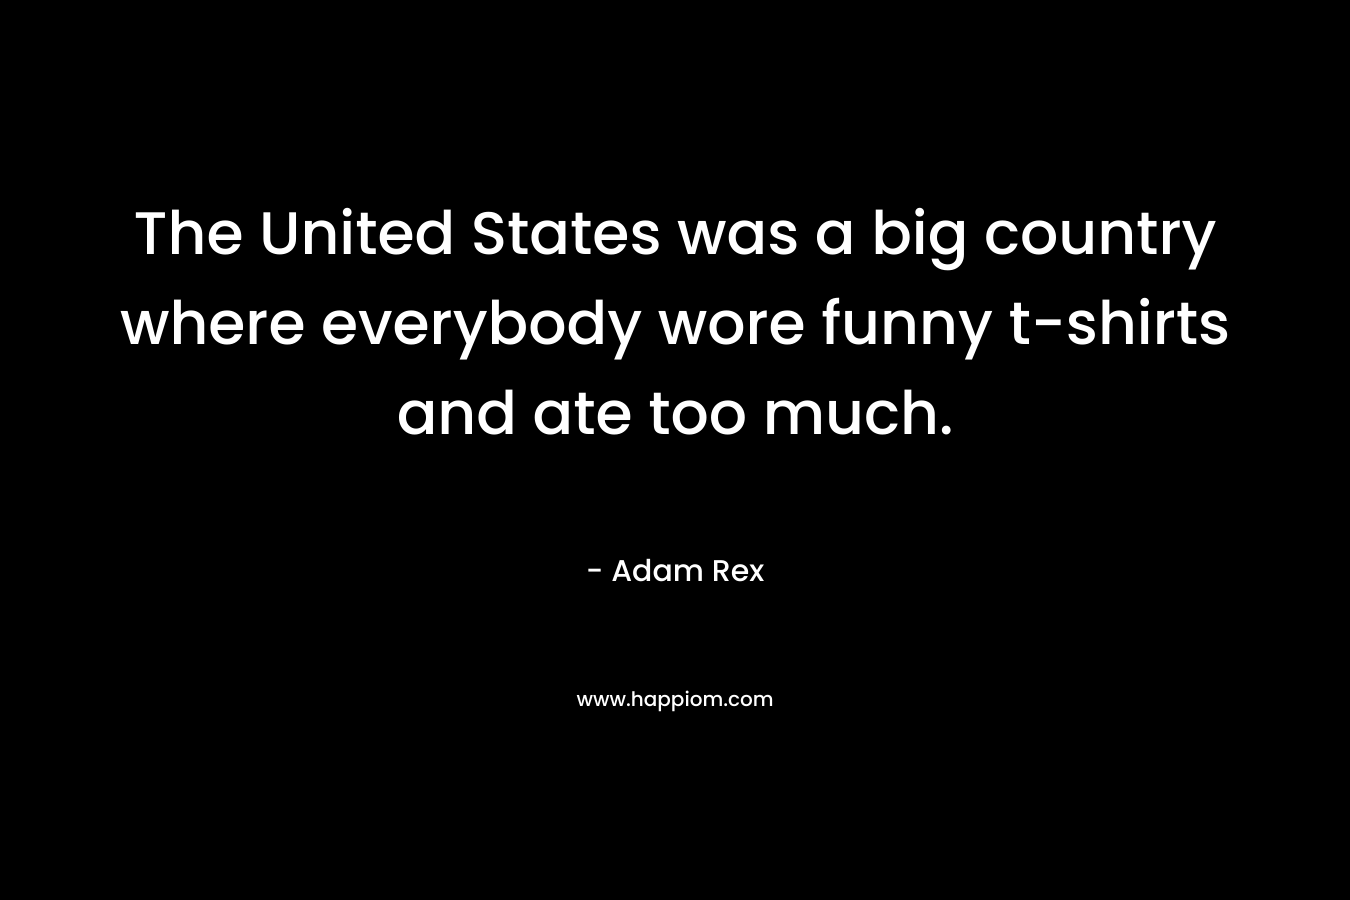 The United States was a big country where everybody wore funny t-shirts and ate too much. – Adam Rex